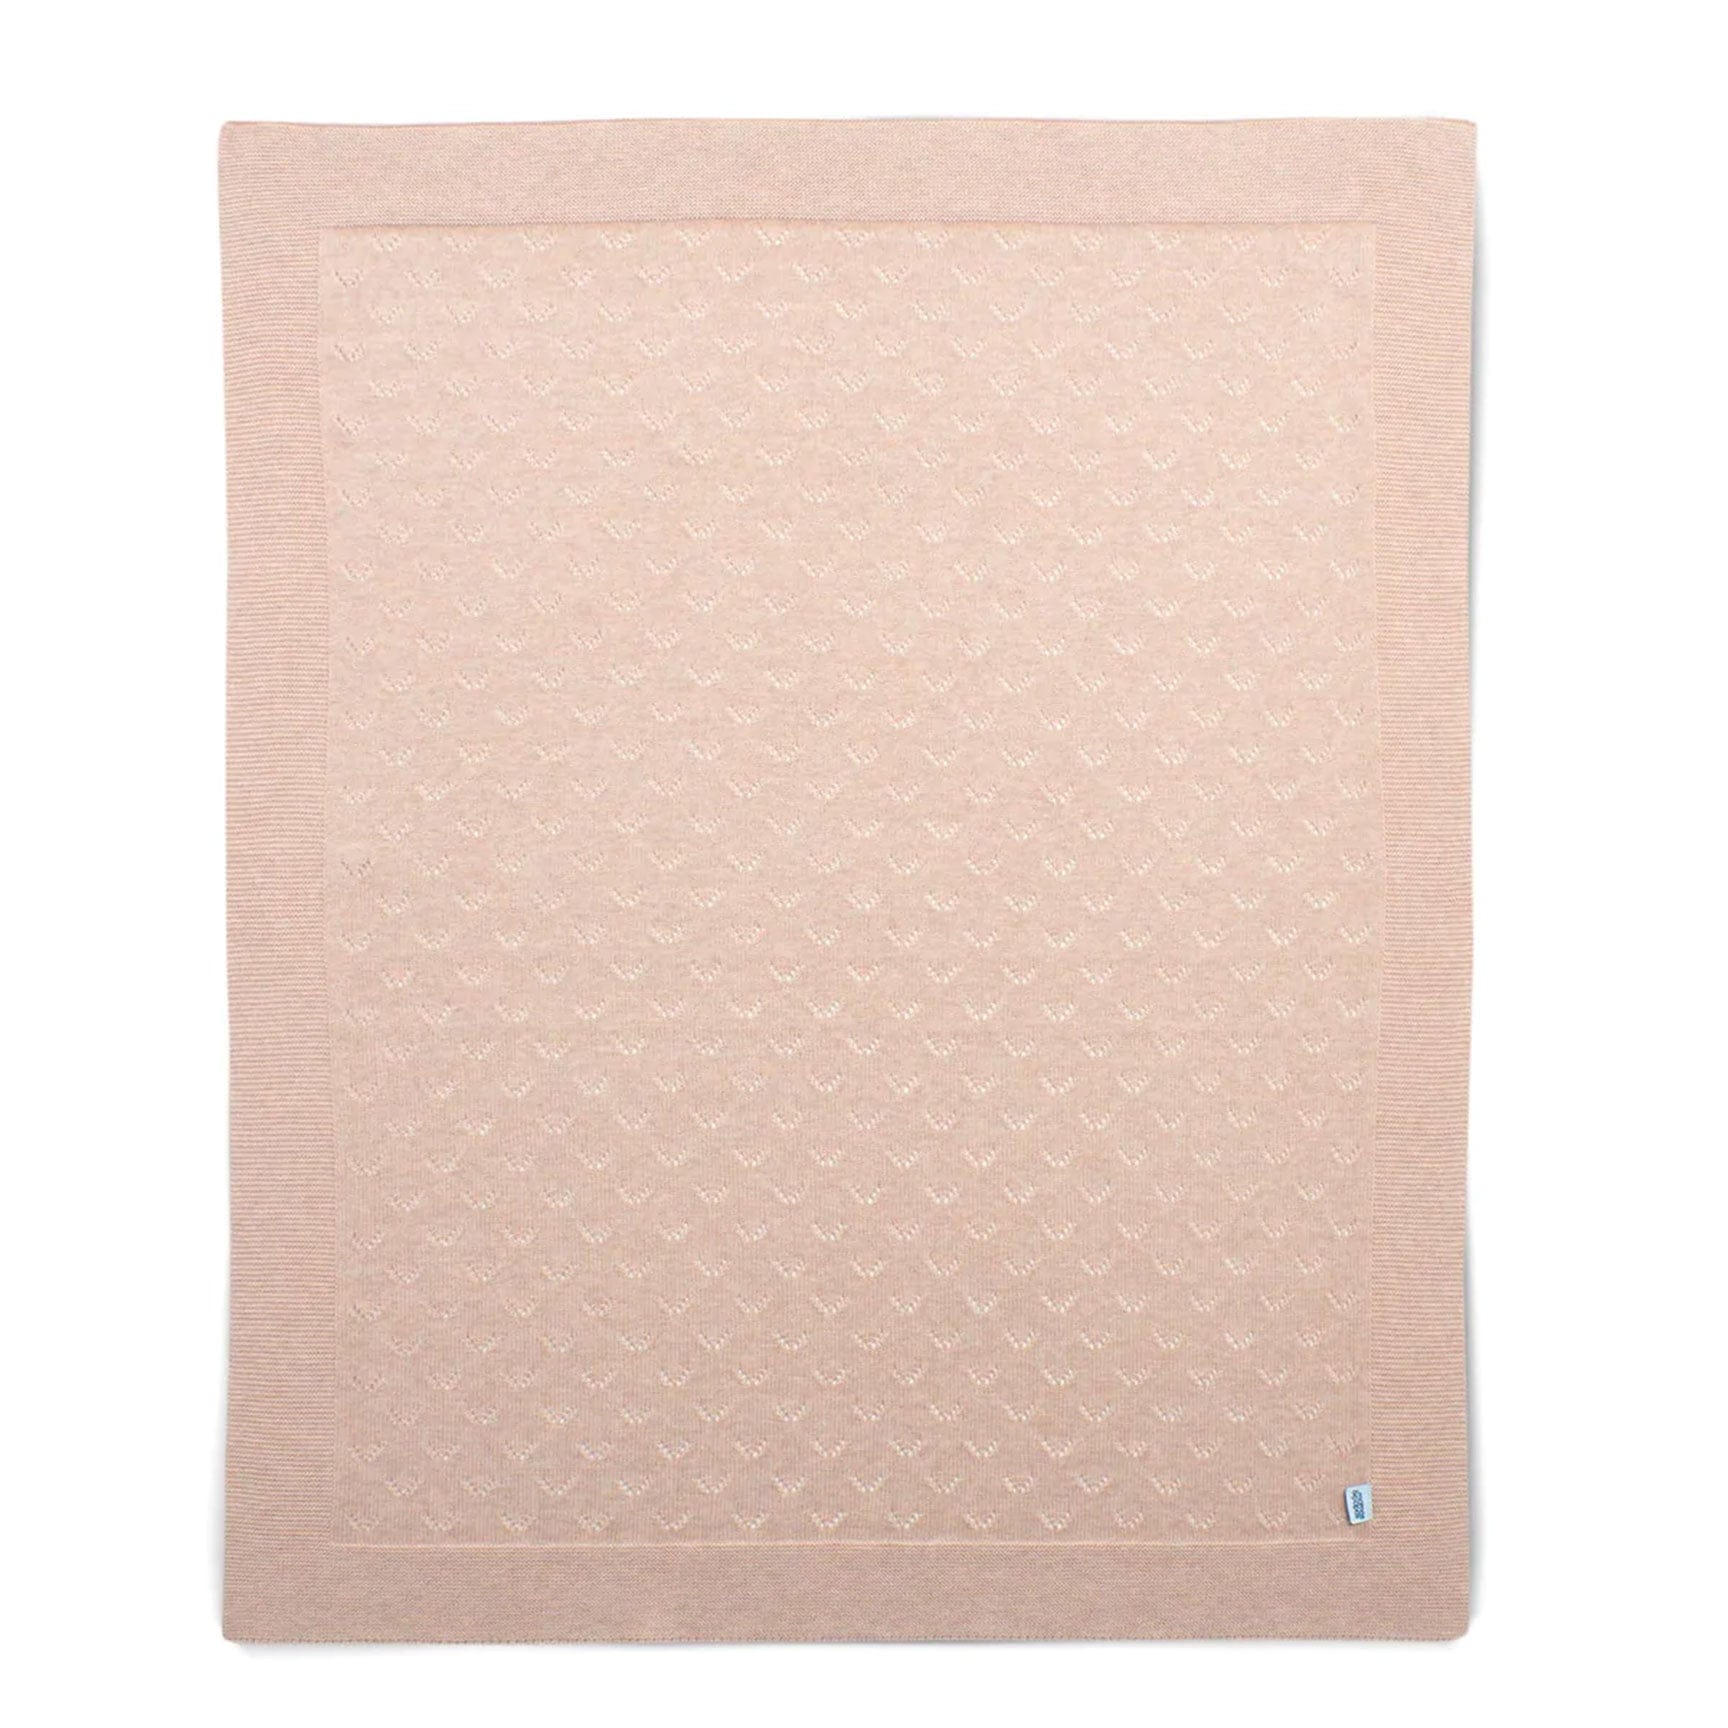 Mamas & Papas Knitted Blanket Small in Pink Pointelle Cot & Cot Bed Blankets 7883GY001